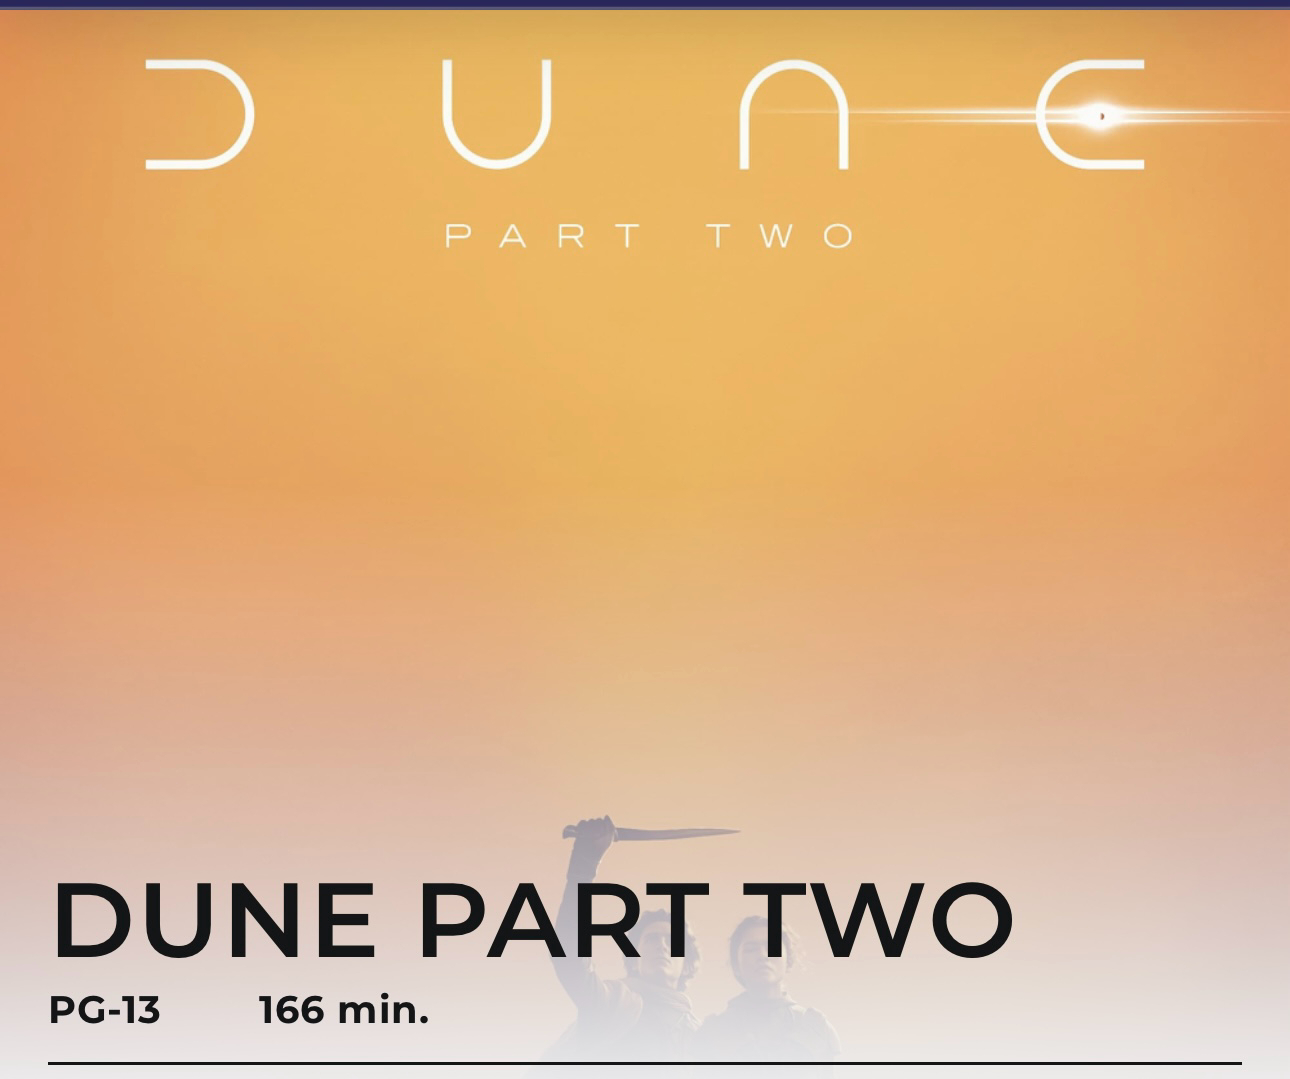 Promotional movie poster for “Dune Part Two” with minimalistic design, showcasing the title with a sunset gradient background and silhouettes of two characters below it. The poster also includes the PG-13 rating and the movie’s duration of 